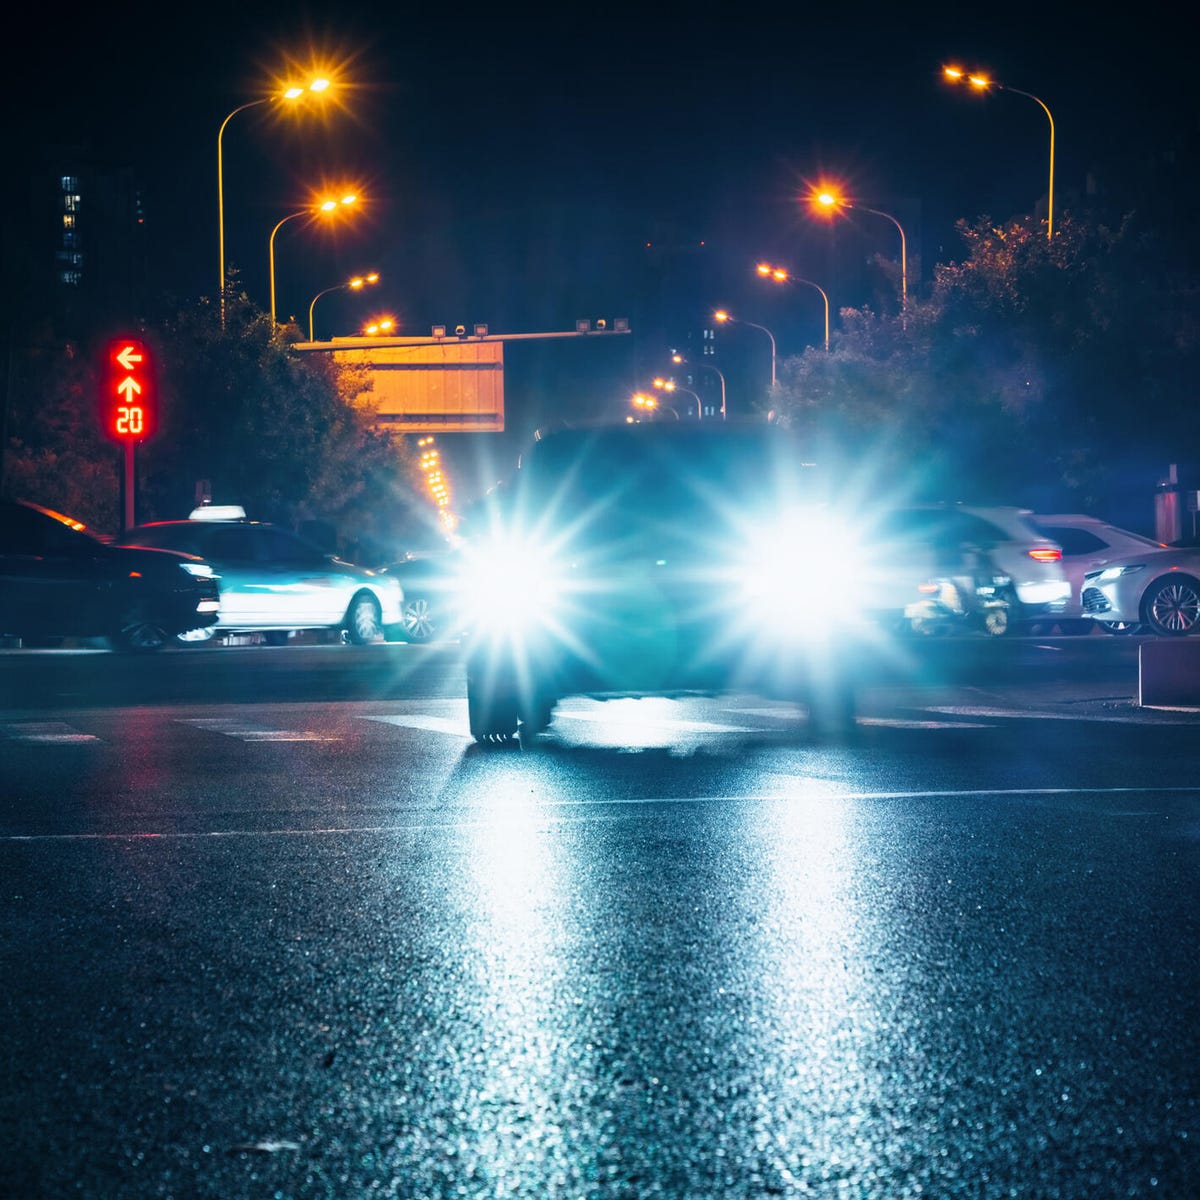 Tips for driving at night - A. Reducing glare from oncoming headlights